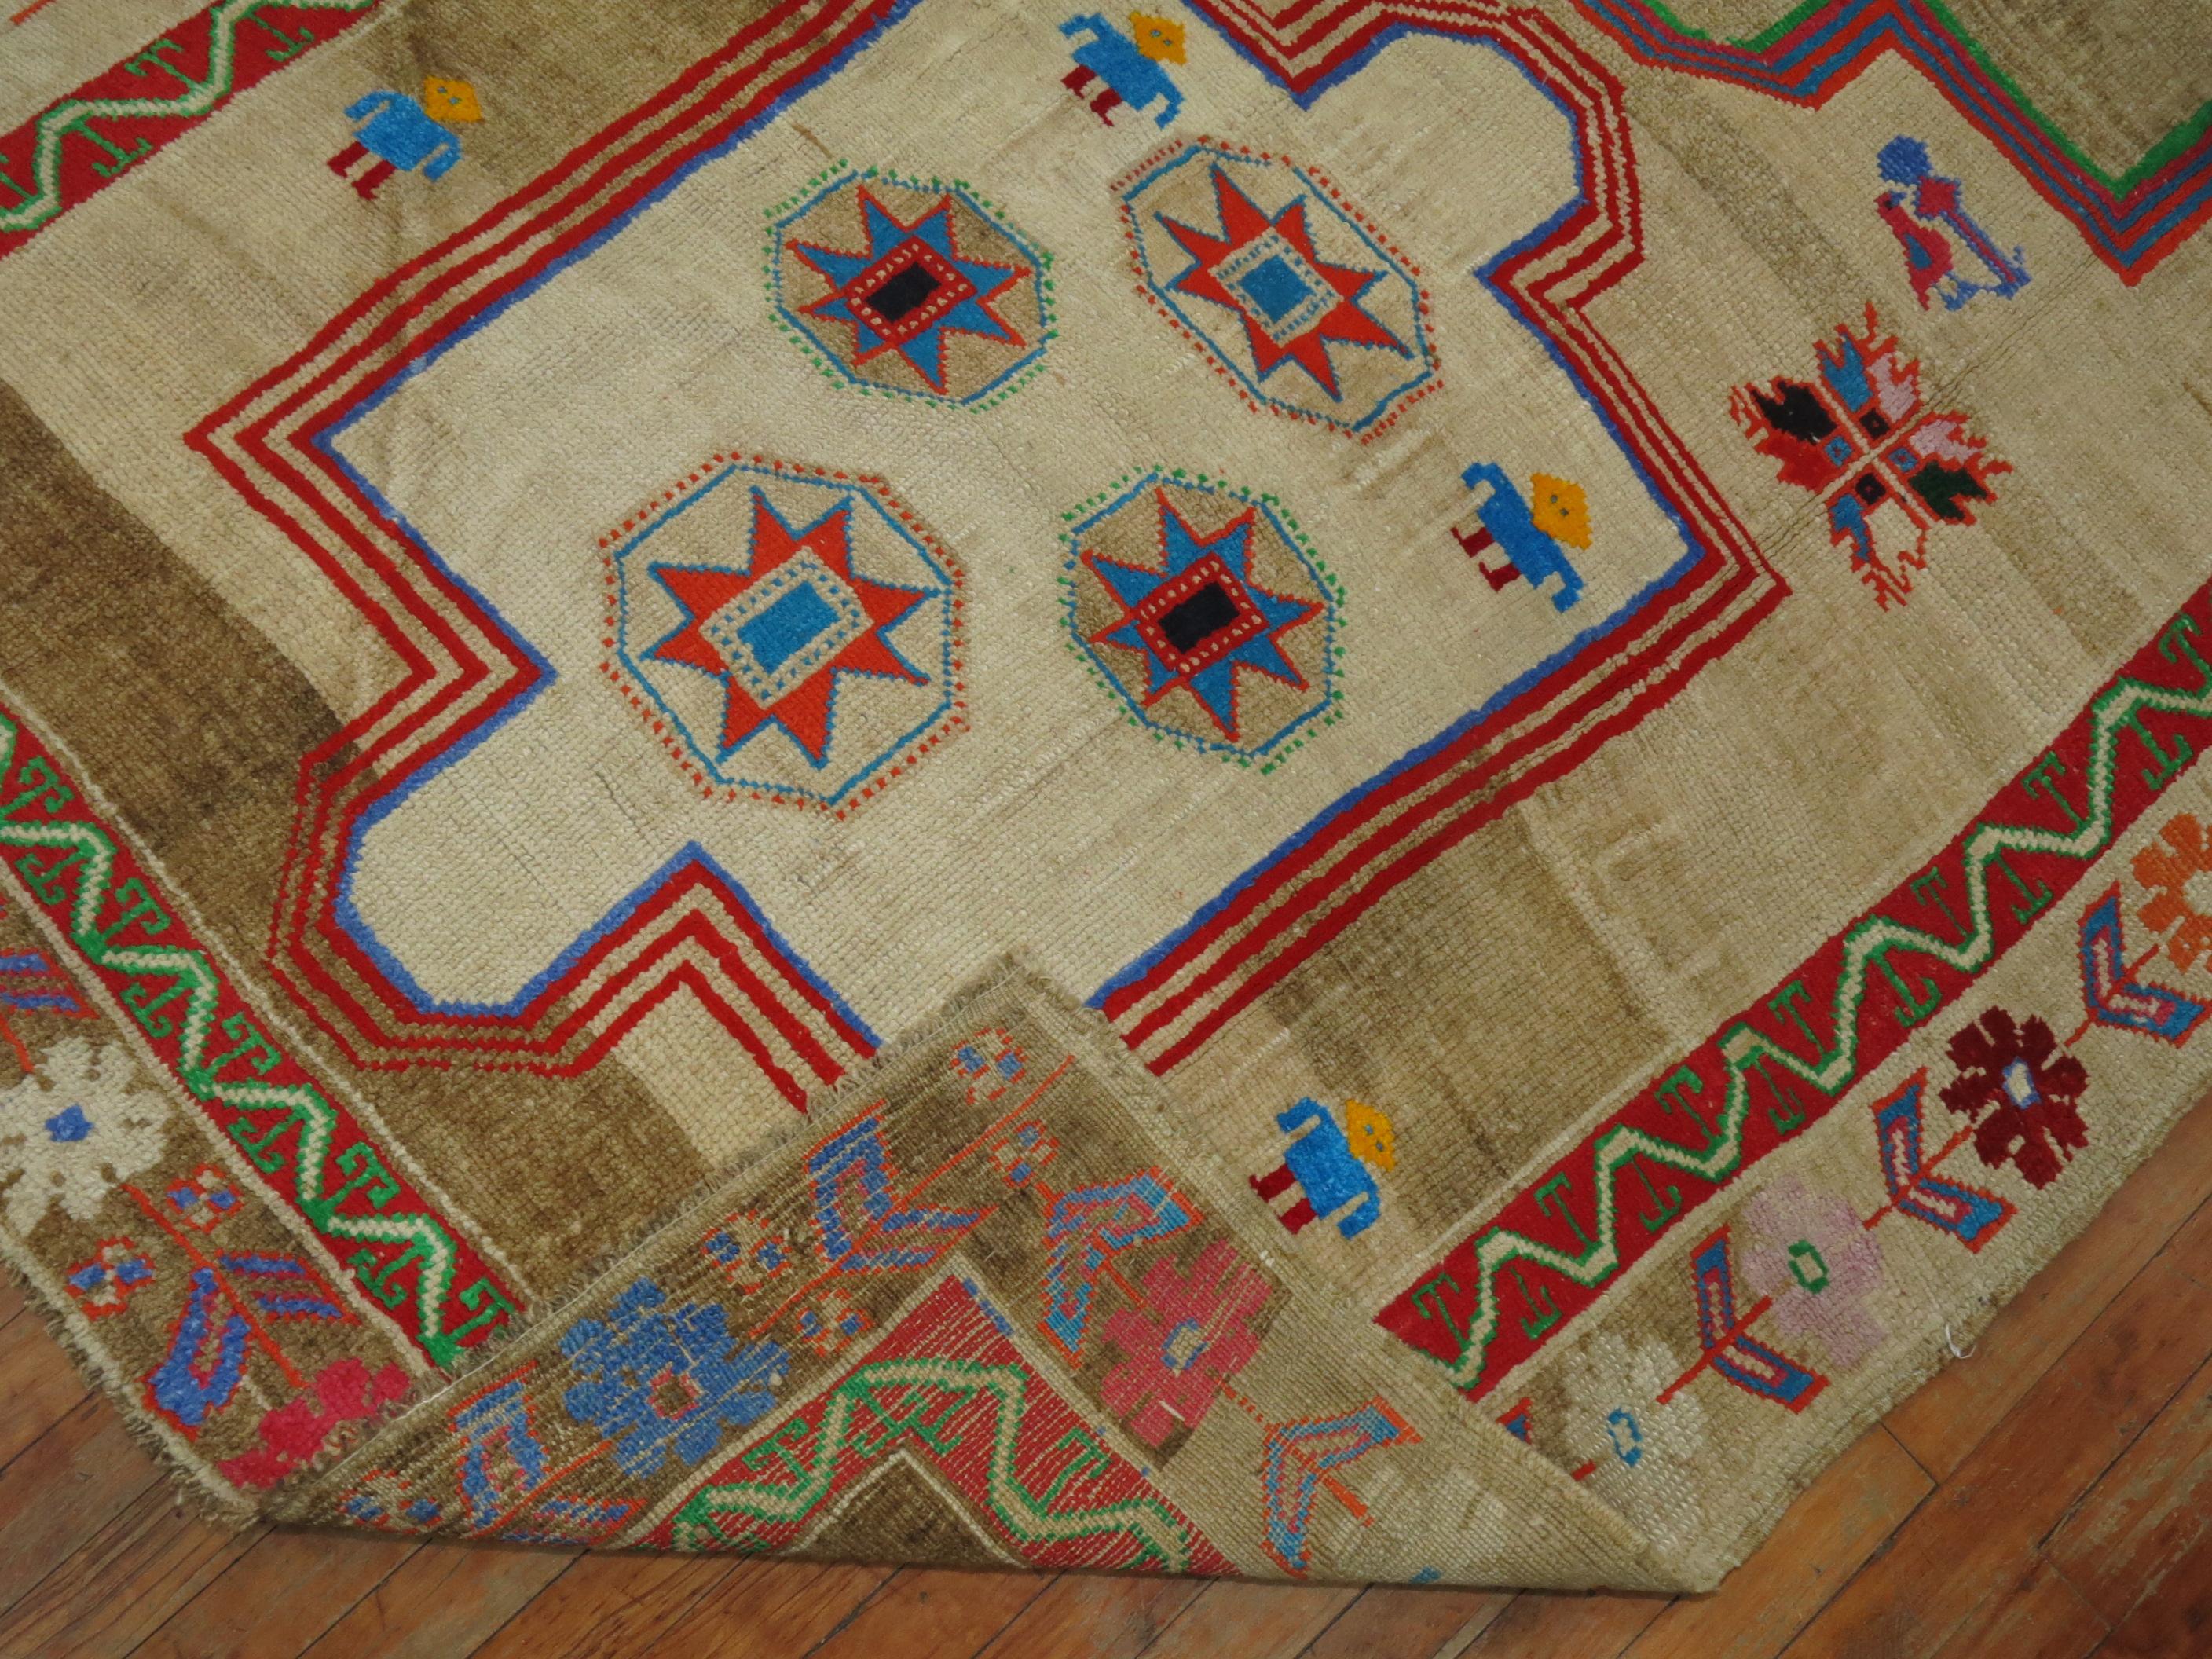 Gallery size Turkish Rug with an abrashed an field with 3 large medallions with predominant accents in neon green, coral, orange and blue. A few small humans are lurking around as well. circa 3rd quarter 20th century

A statement piece that might